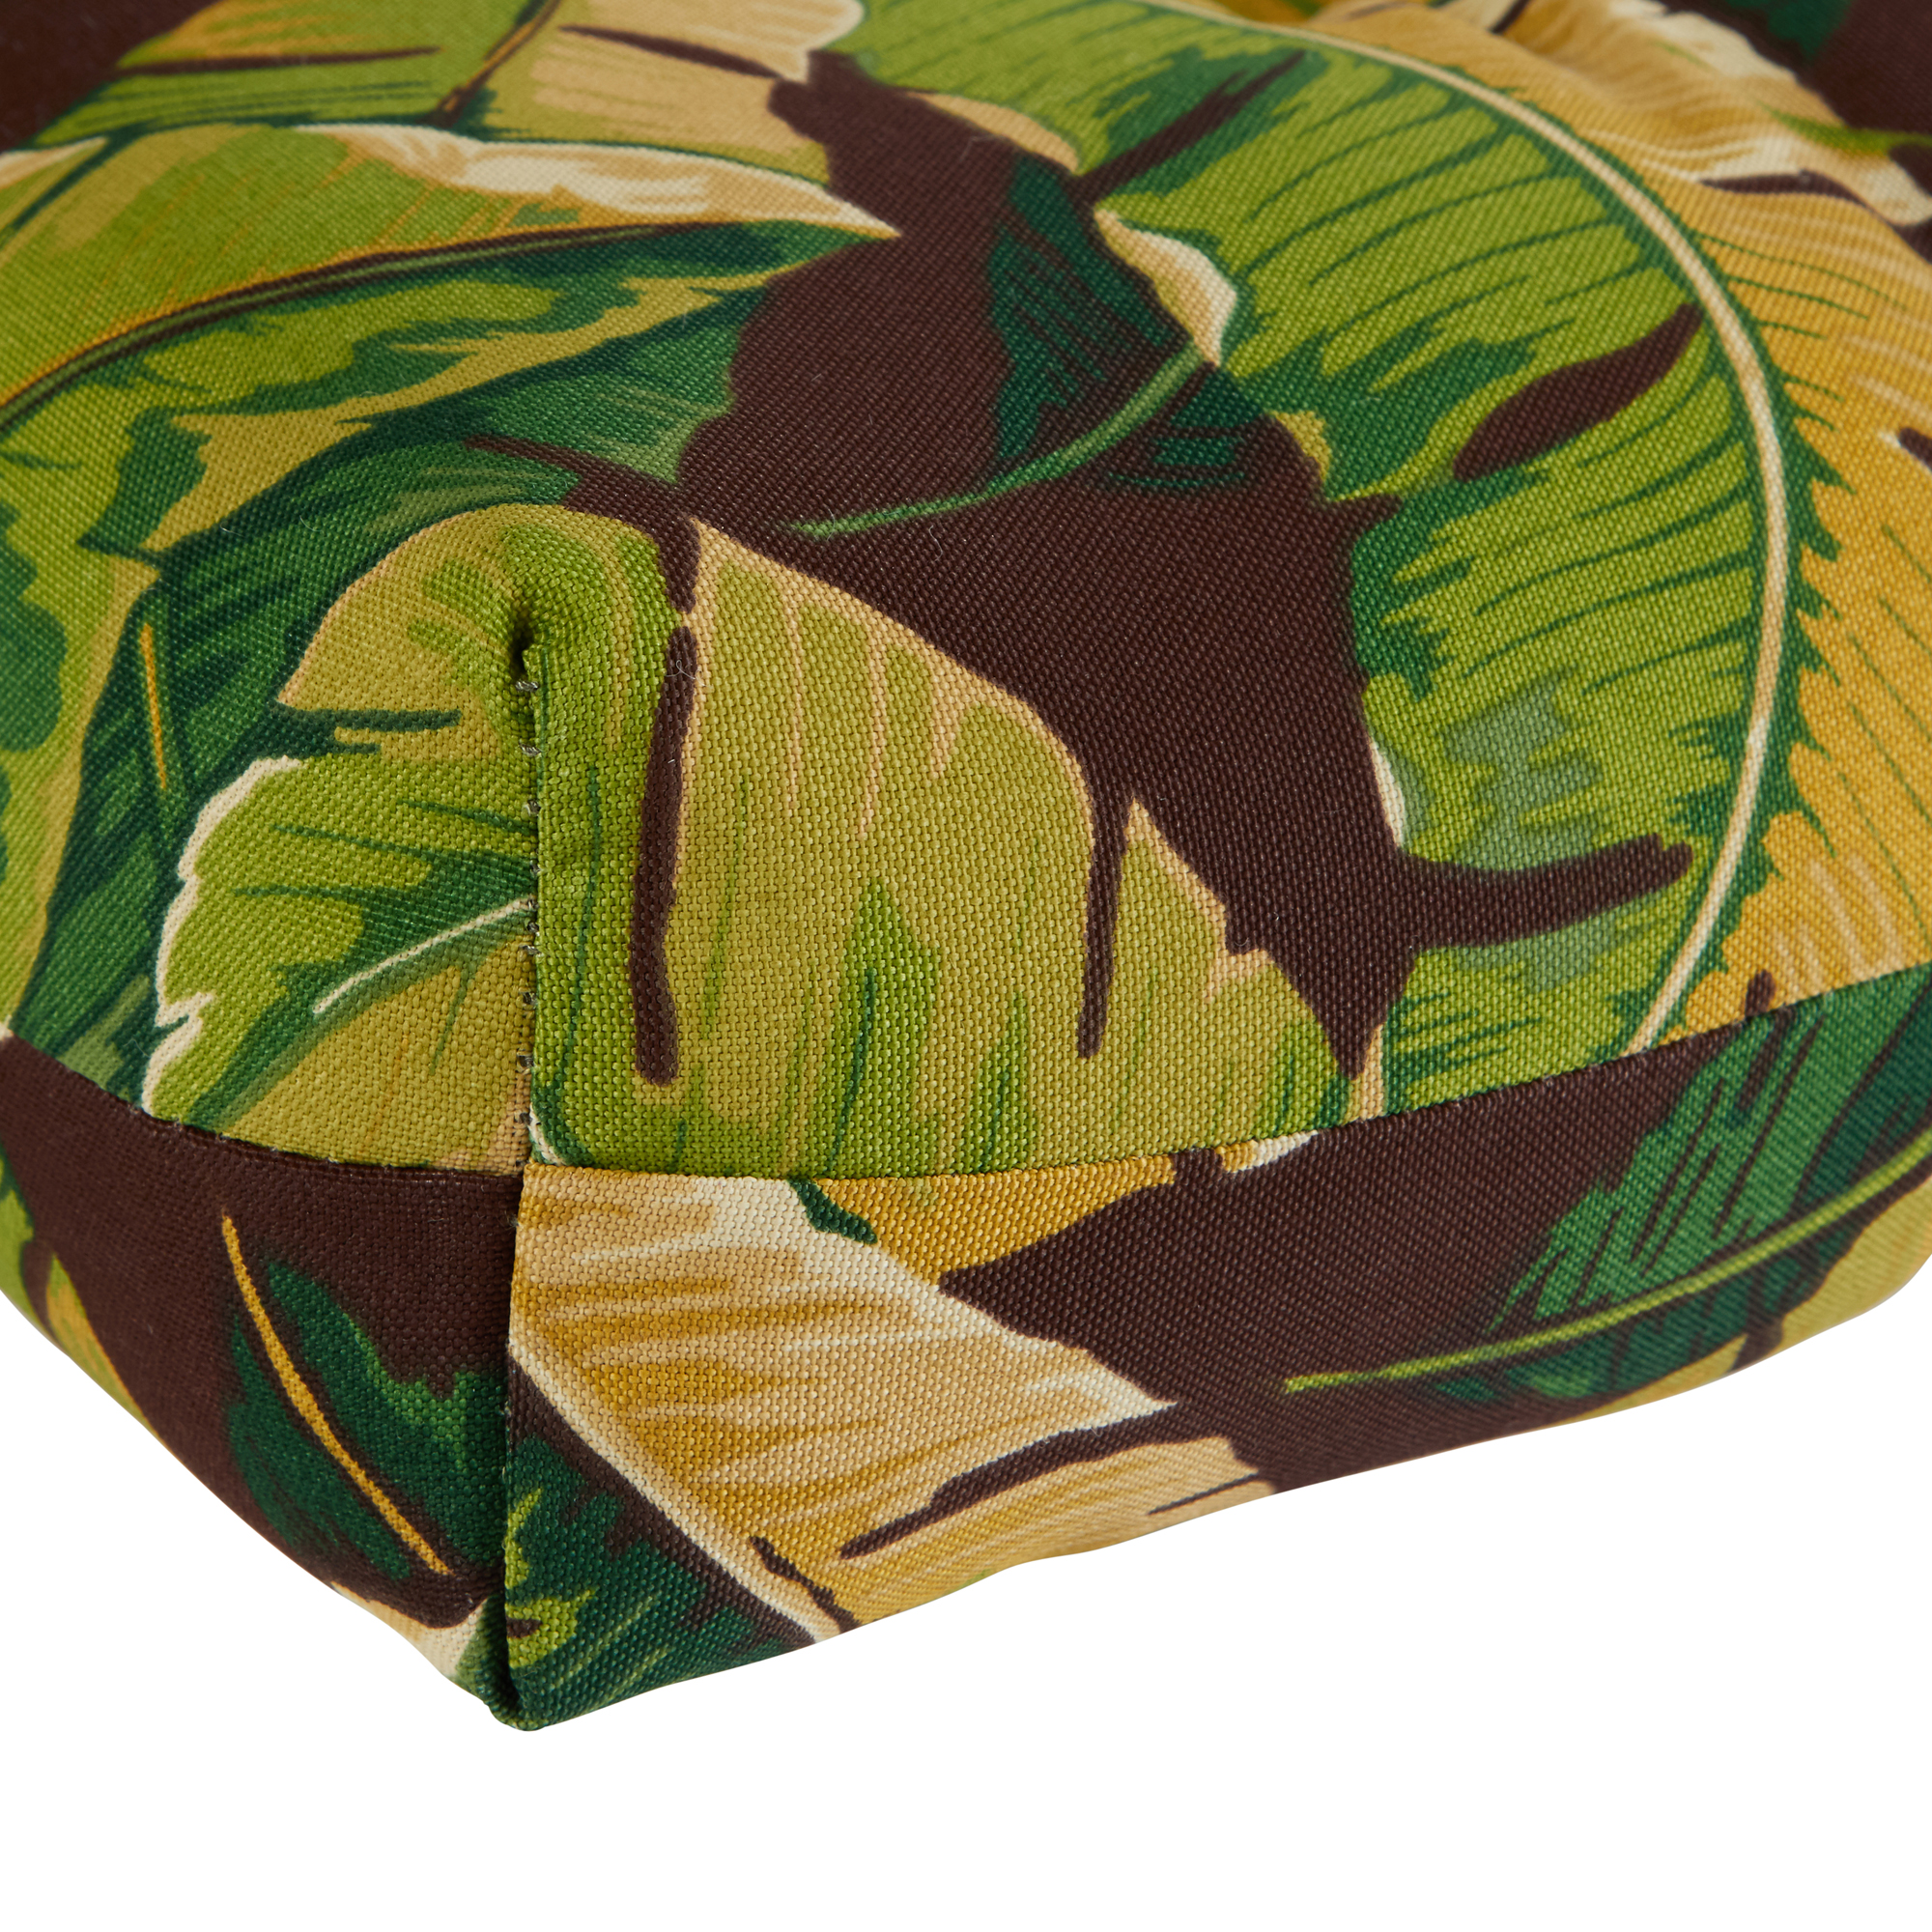 Greendale Home Fashions Palm Leaves Outdoor High Back Chair Cushion - image 4 of 8